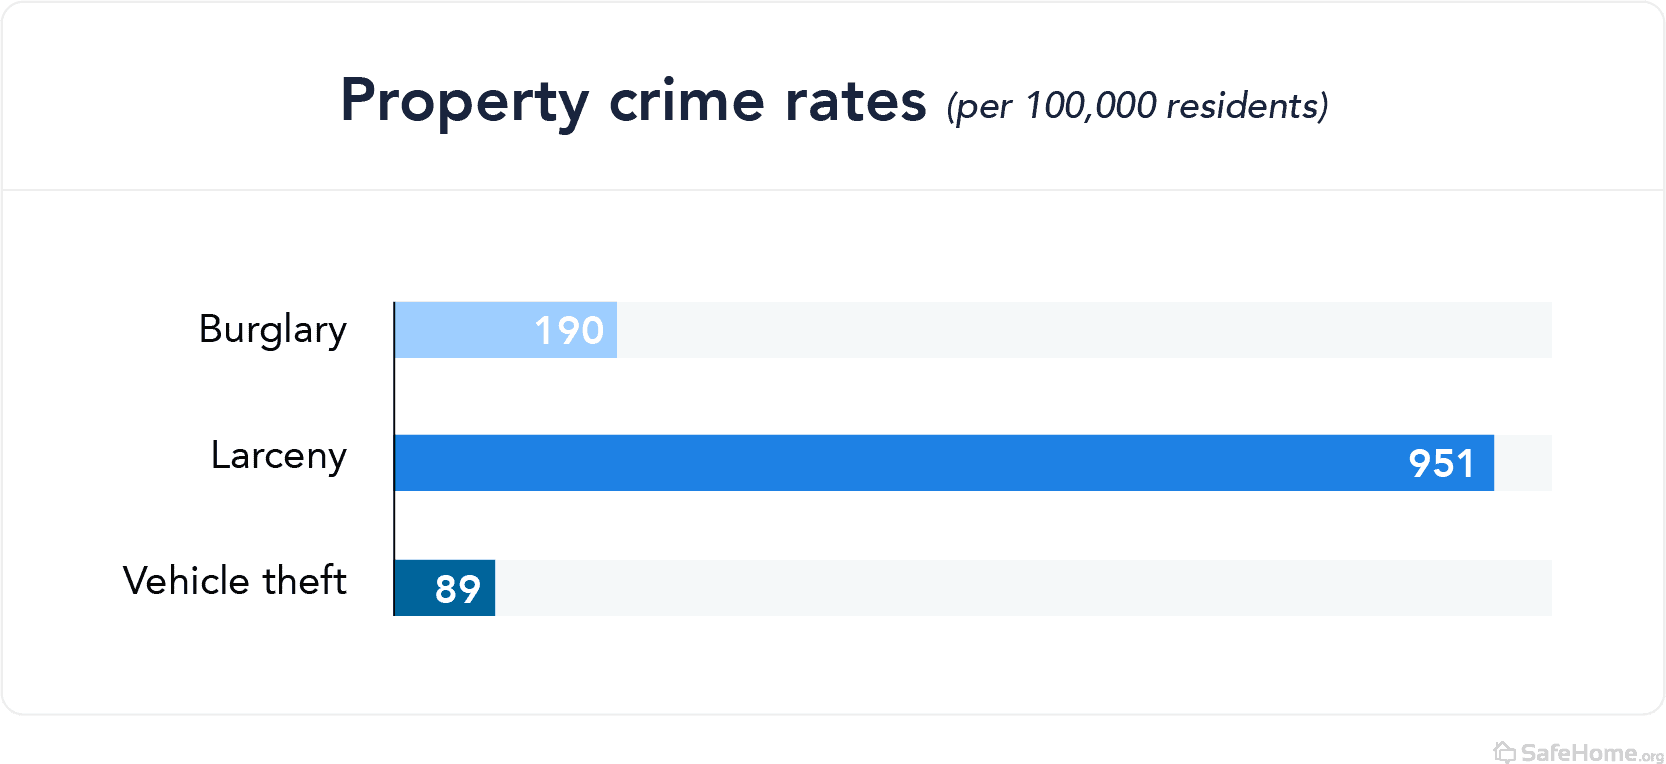 west virginia-property crime rates